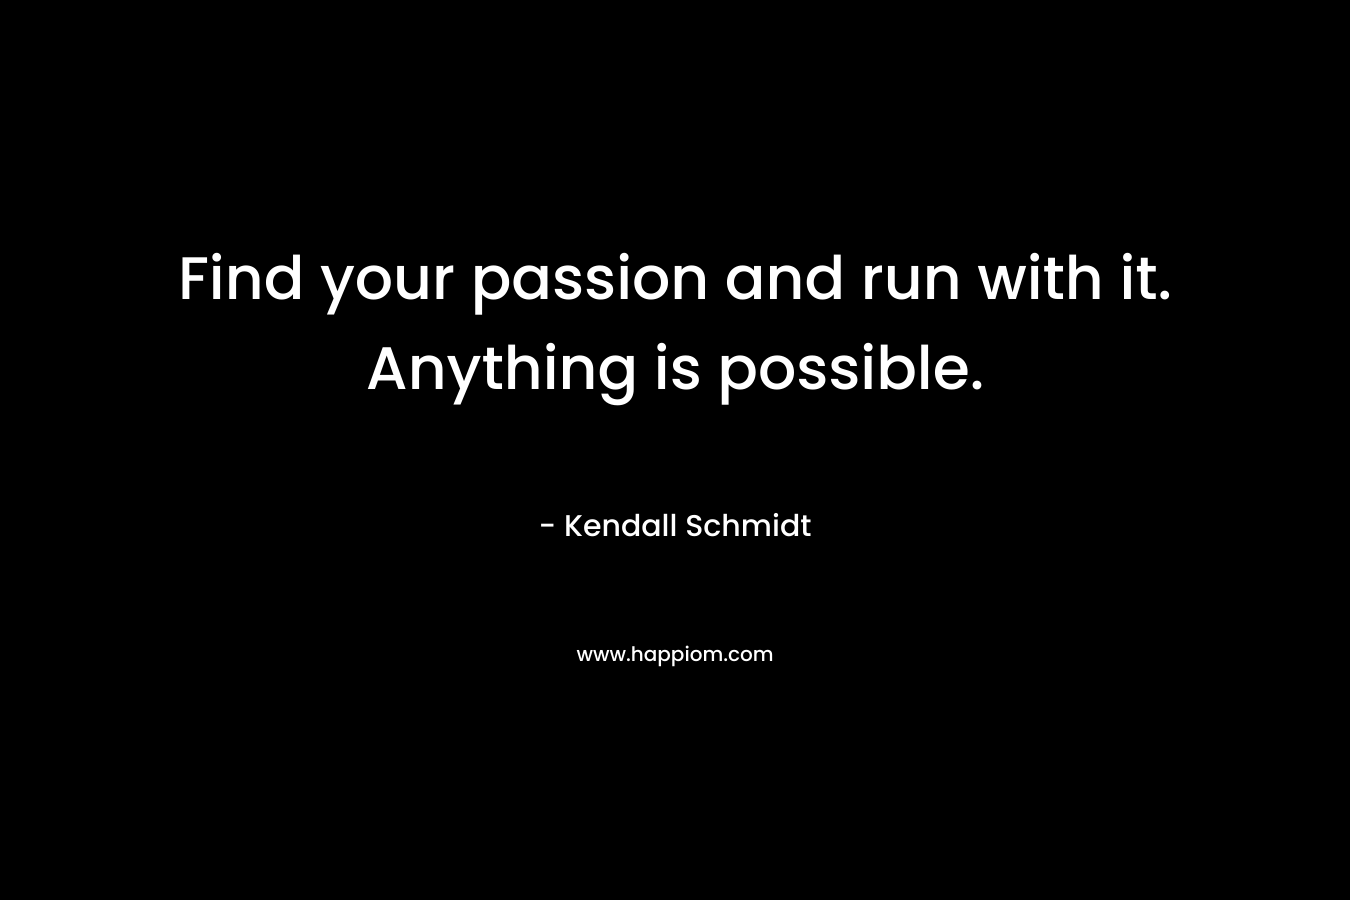 Find your passion and run with it. Anything is possible. – Kendall Schmidt